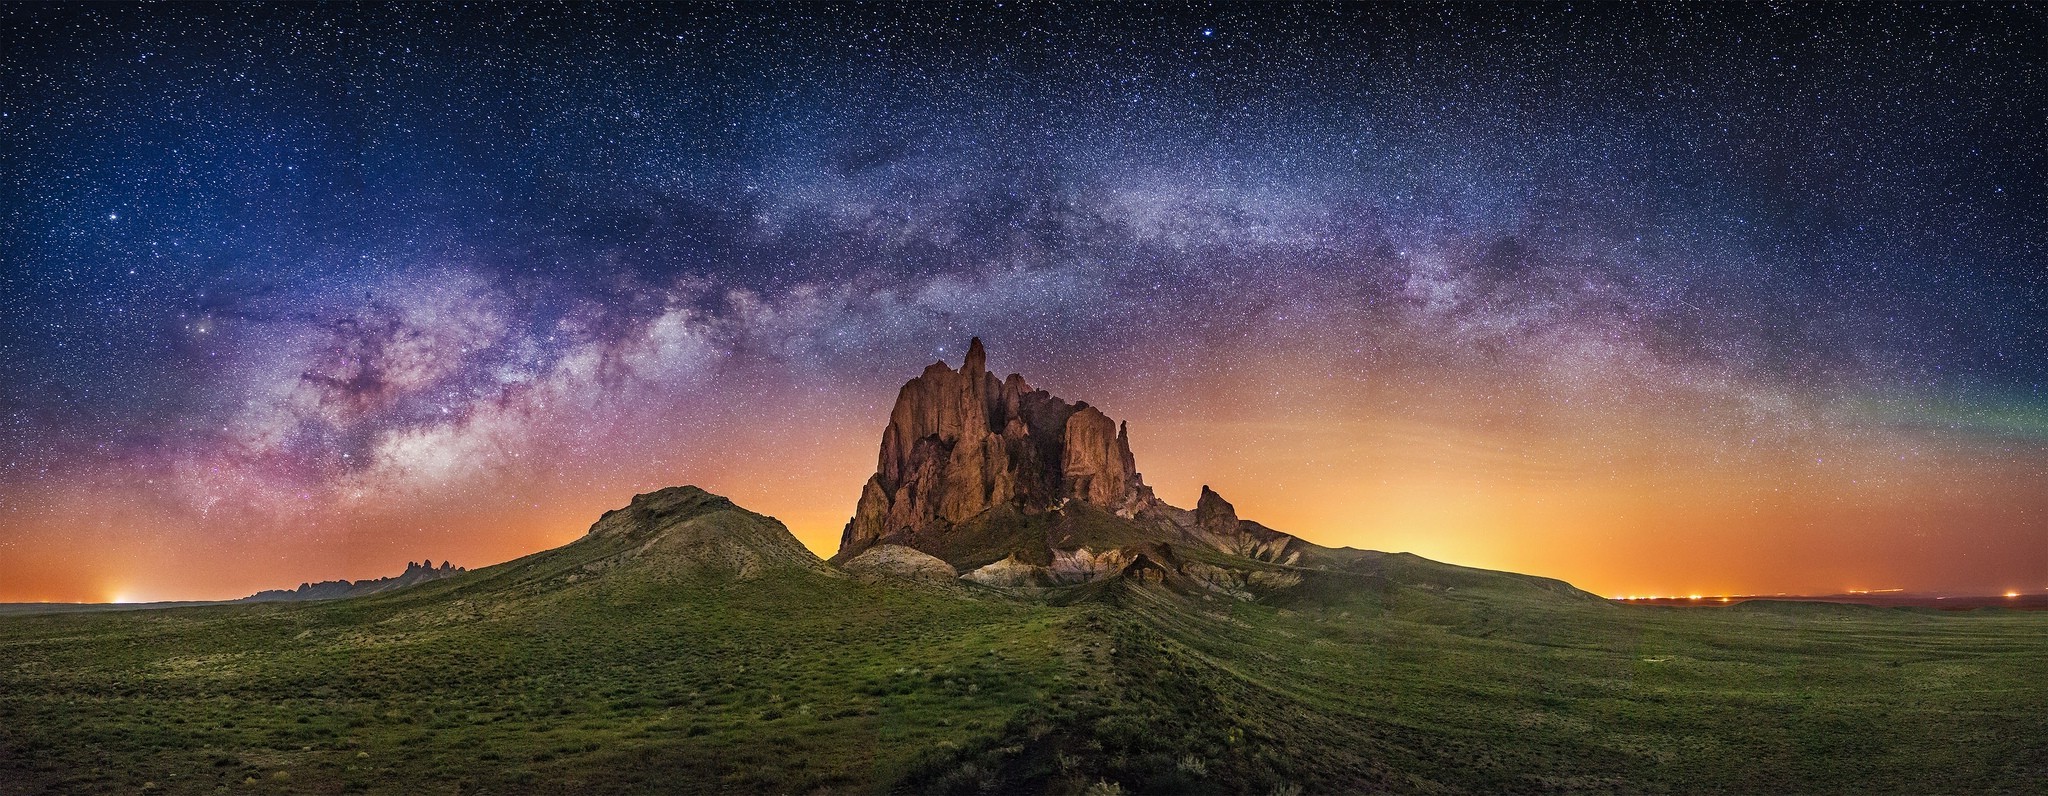 nature, Photography, Landscape, Milky Way, Starry Night, Rock, Lights, Galaxy, Long Exposure, New Mexico Wallpaper